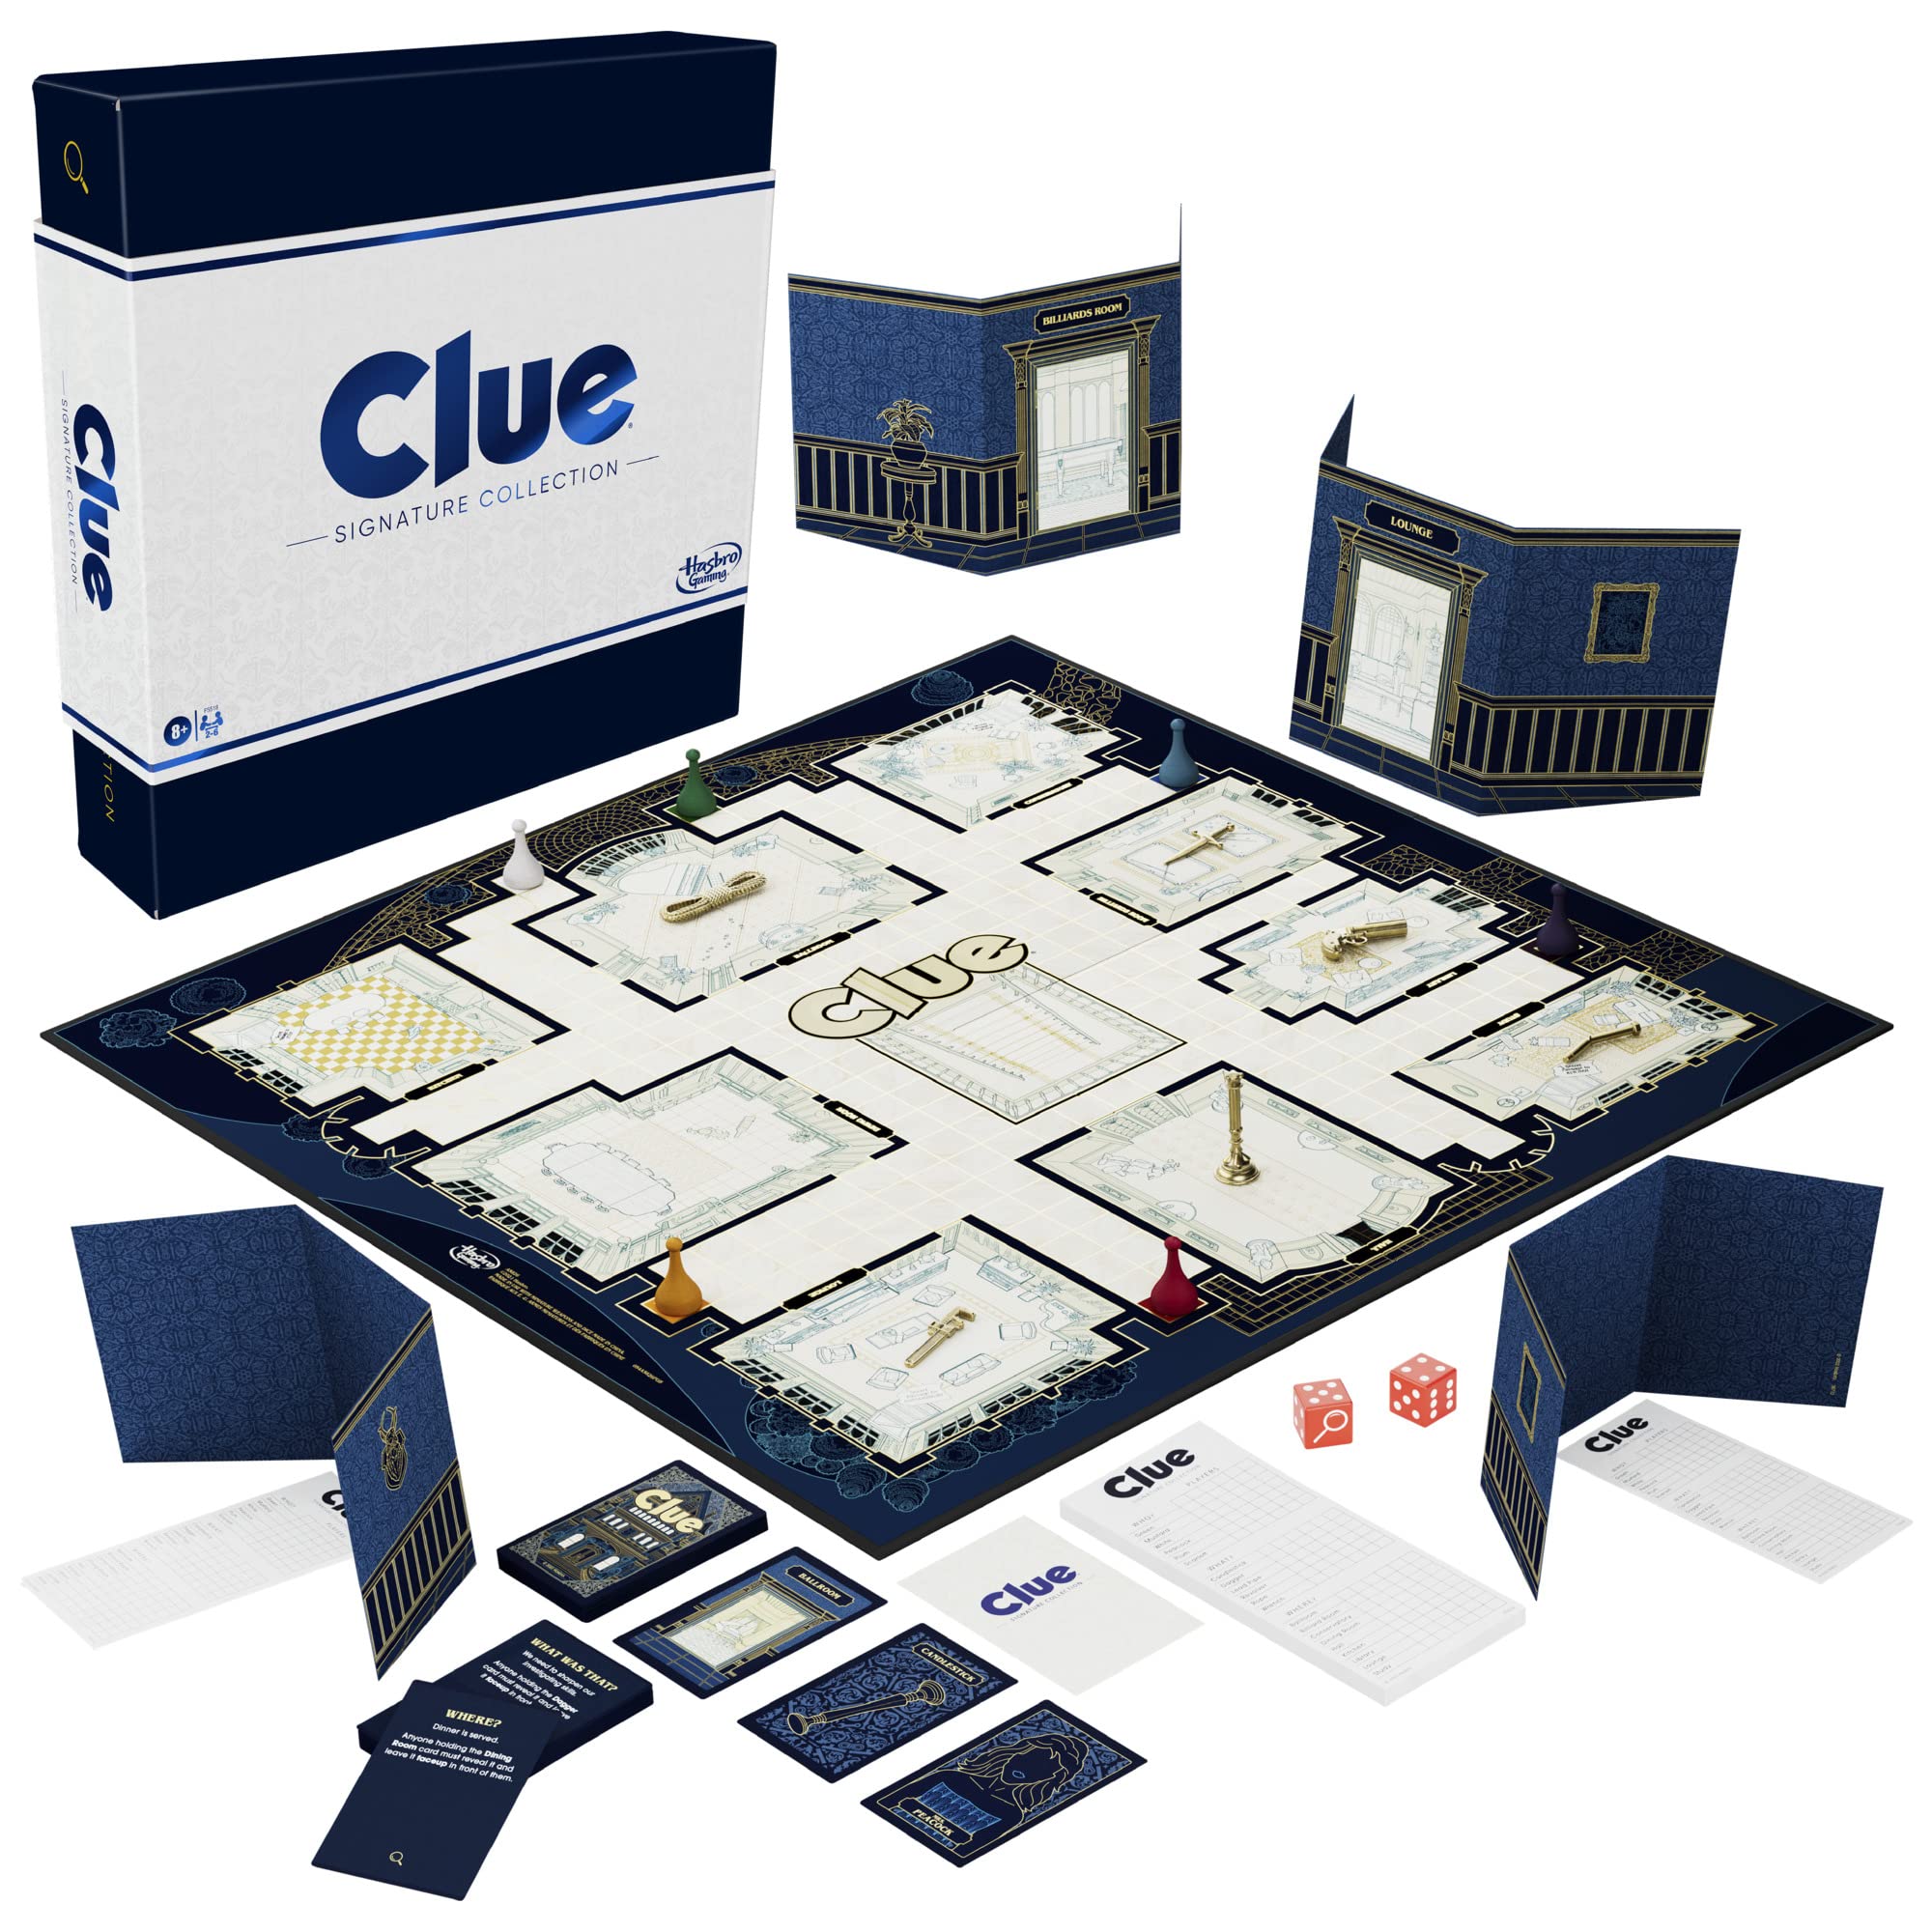 Clue Signature Collection Board Game w/ Premium Packaging & Components $16.60 + Free Shipping w/ Prime or on $25+